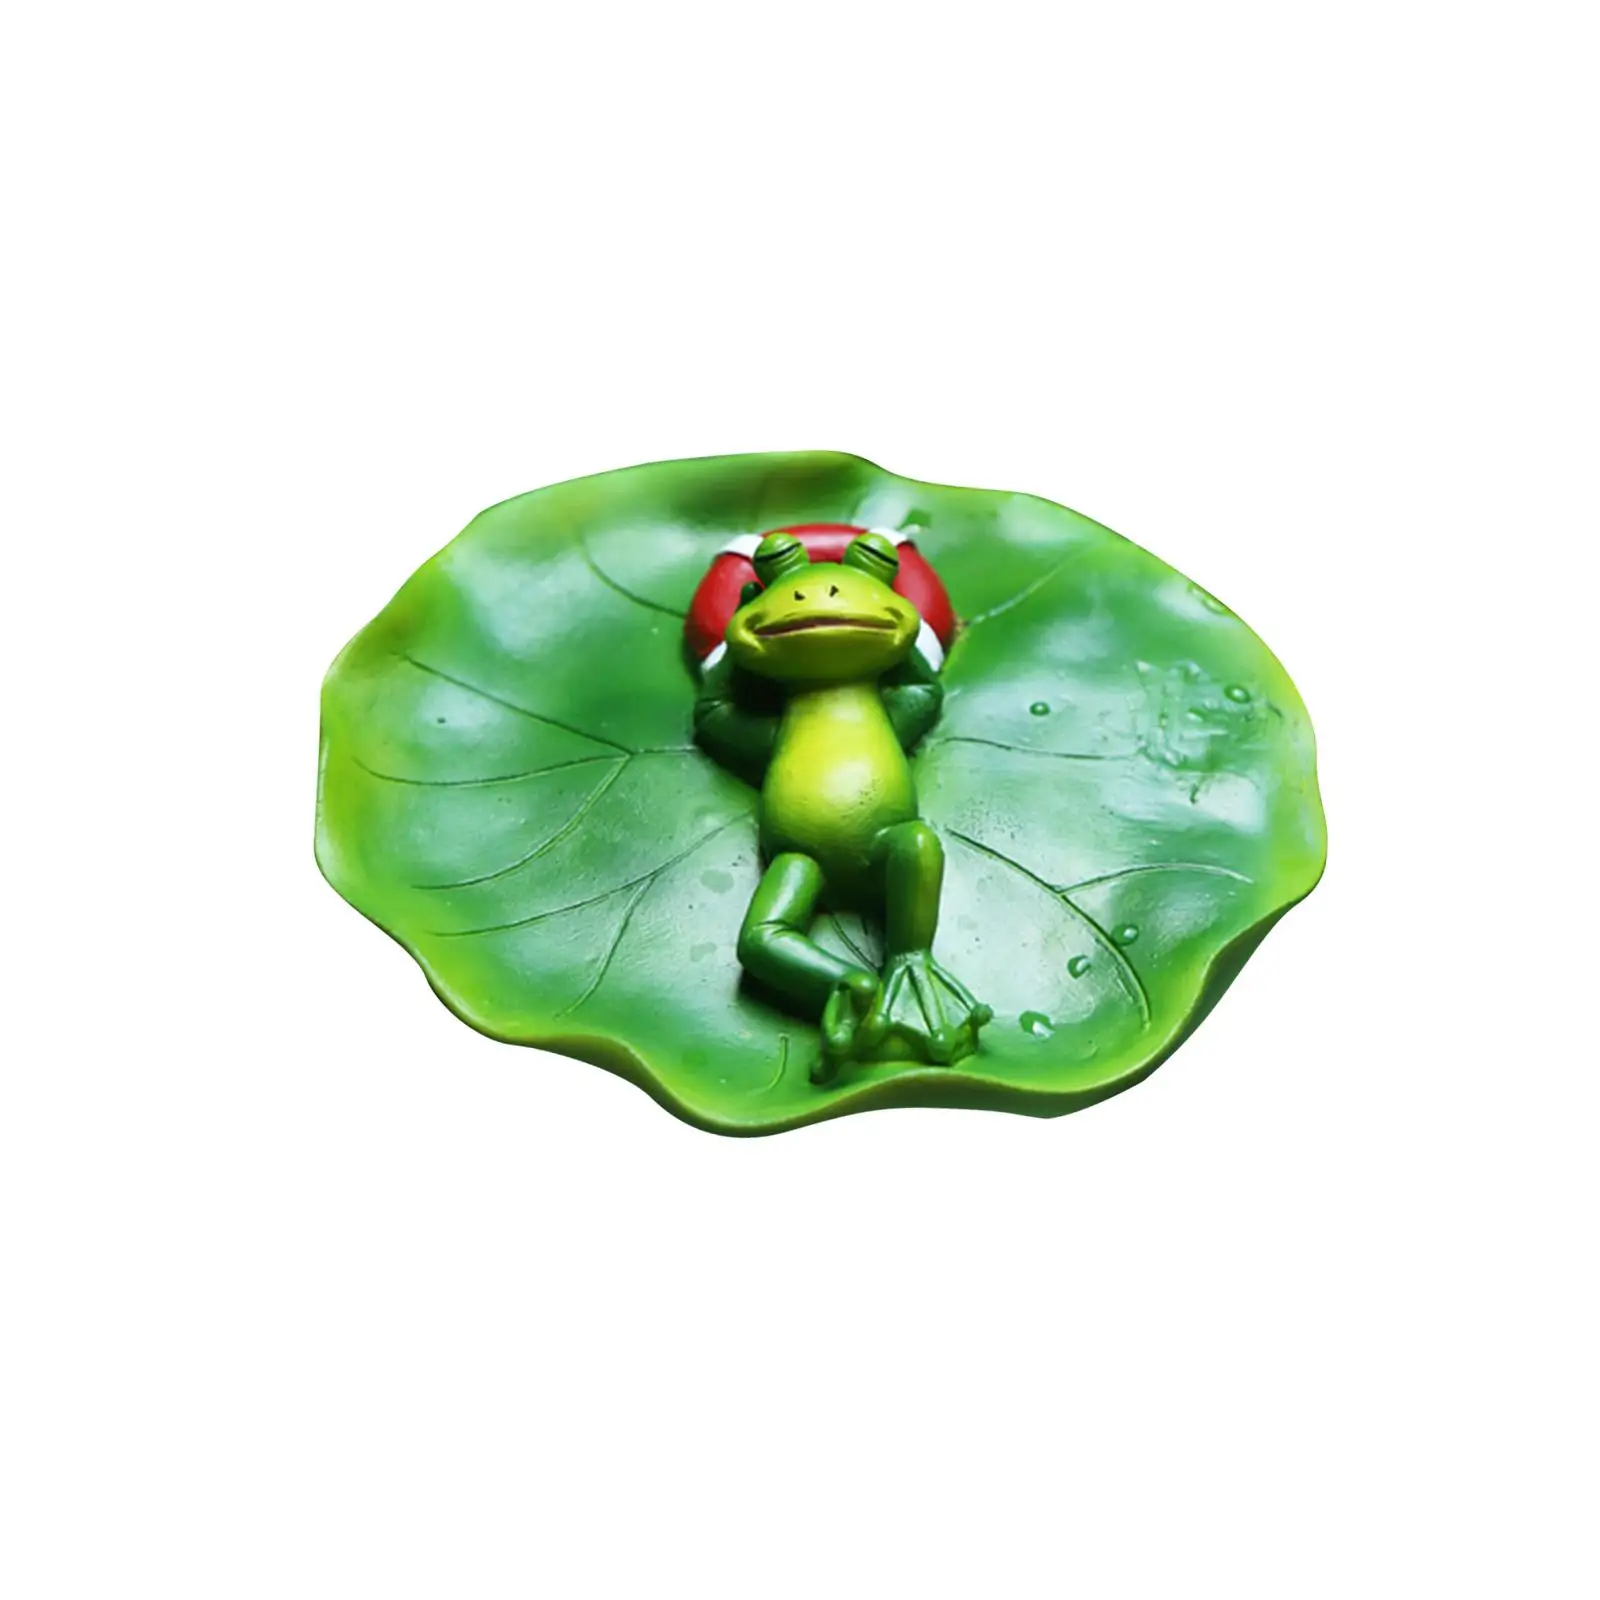 Artificial Water Floating Frog Ornament Figurine Fairy Garden Statue Resin Decor Pool Accessories for Pond Outdoor Cabinet Shelf